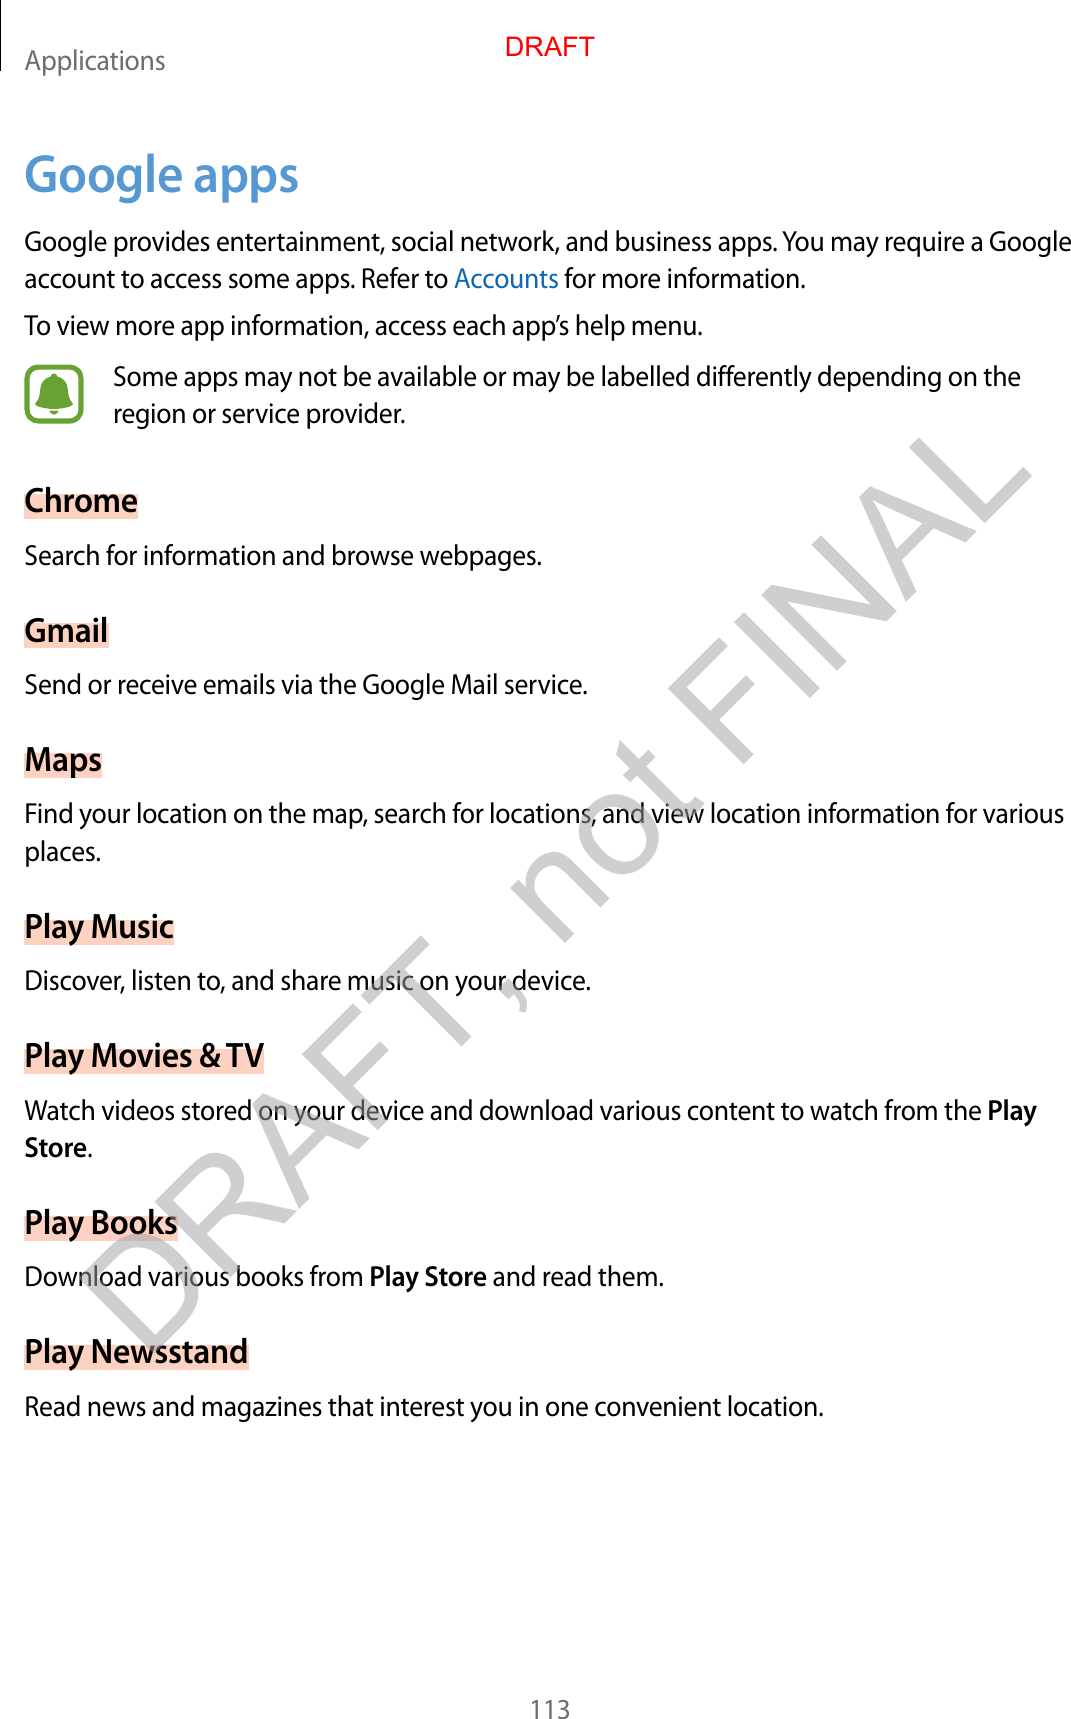 Applications113Google appsGoogle provides entertainment, social network, and business apps. You may require a Google account to access some apps. Refer to Accounts for more information.To view more app information, access each app’s help menu.Some apps may not be available or may be labelled differently depending on the region or service provider.ChromeSearch for information and browse webpages.GmailSend or receive emails via the Google Mail service.MapsFind your location on the map, search for locations, and view location information for various places.Play MusicDiscover, listen to, and share music on your device.Play Movies &amp; TVWatch videos stored on your device and download various content to watch from the Play Store.Play BooksDownload various books from Play Store and read them.Play NewsstandRead news and magazines that interest you in one convenient location.DRAFTDRAFT, not FINAL